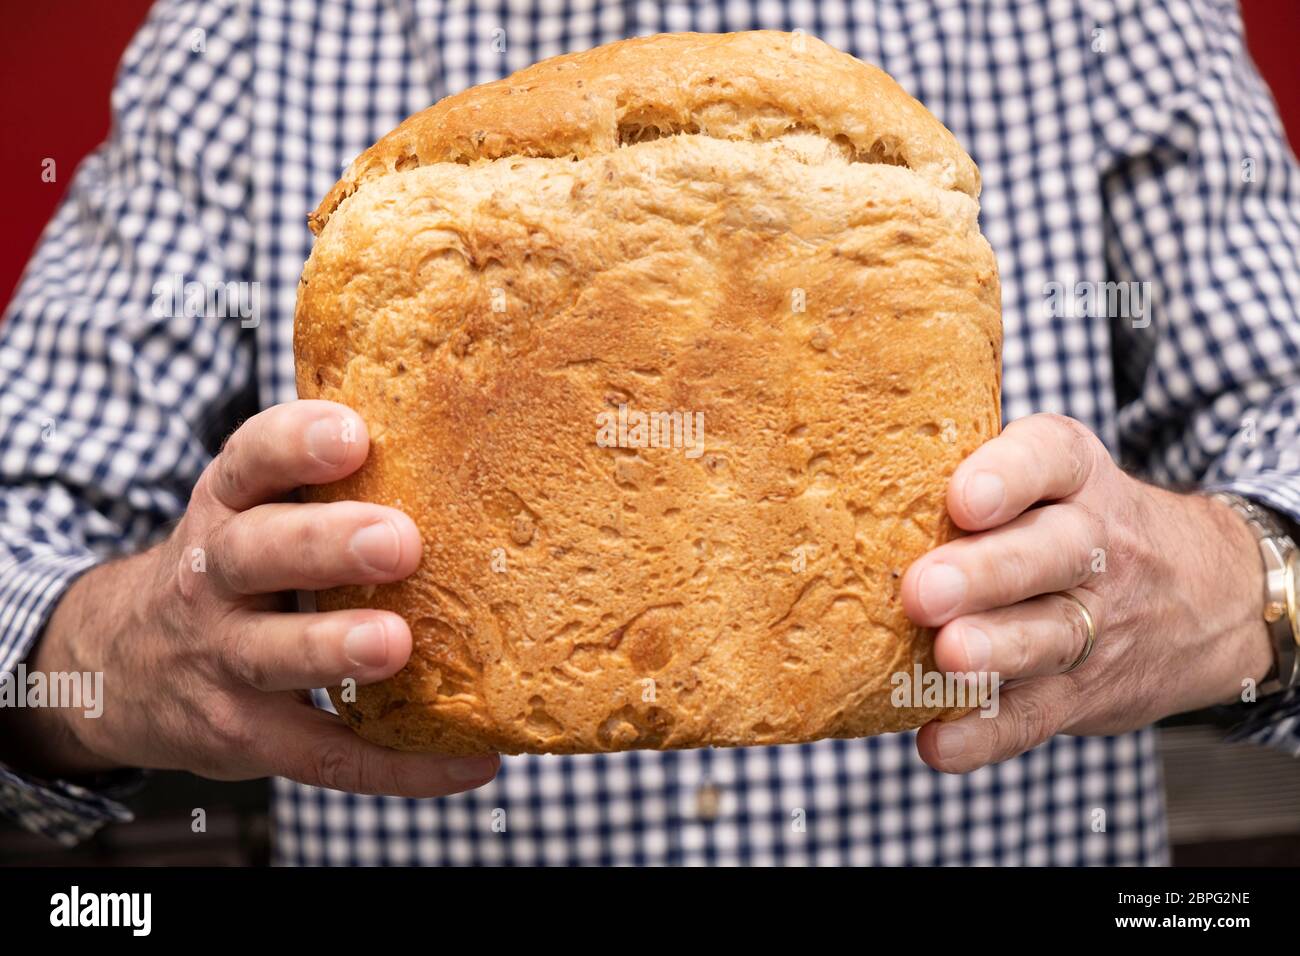 Homemade bread loaf , man holding fresh home made baking in hands Stock Photo